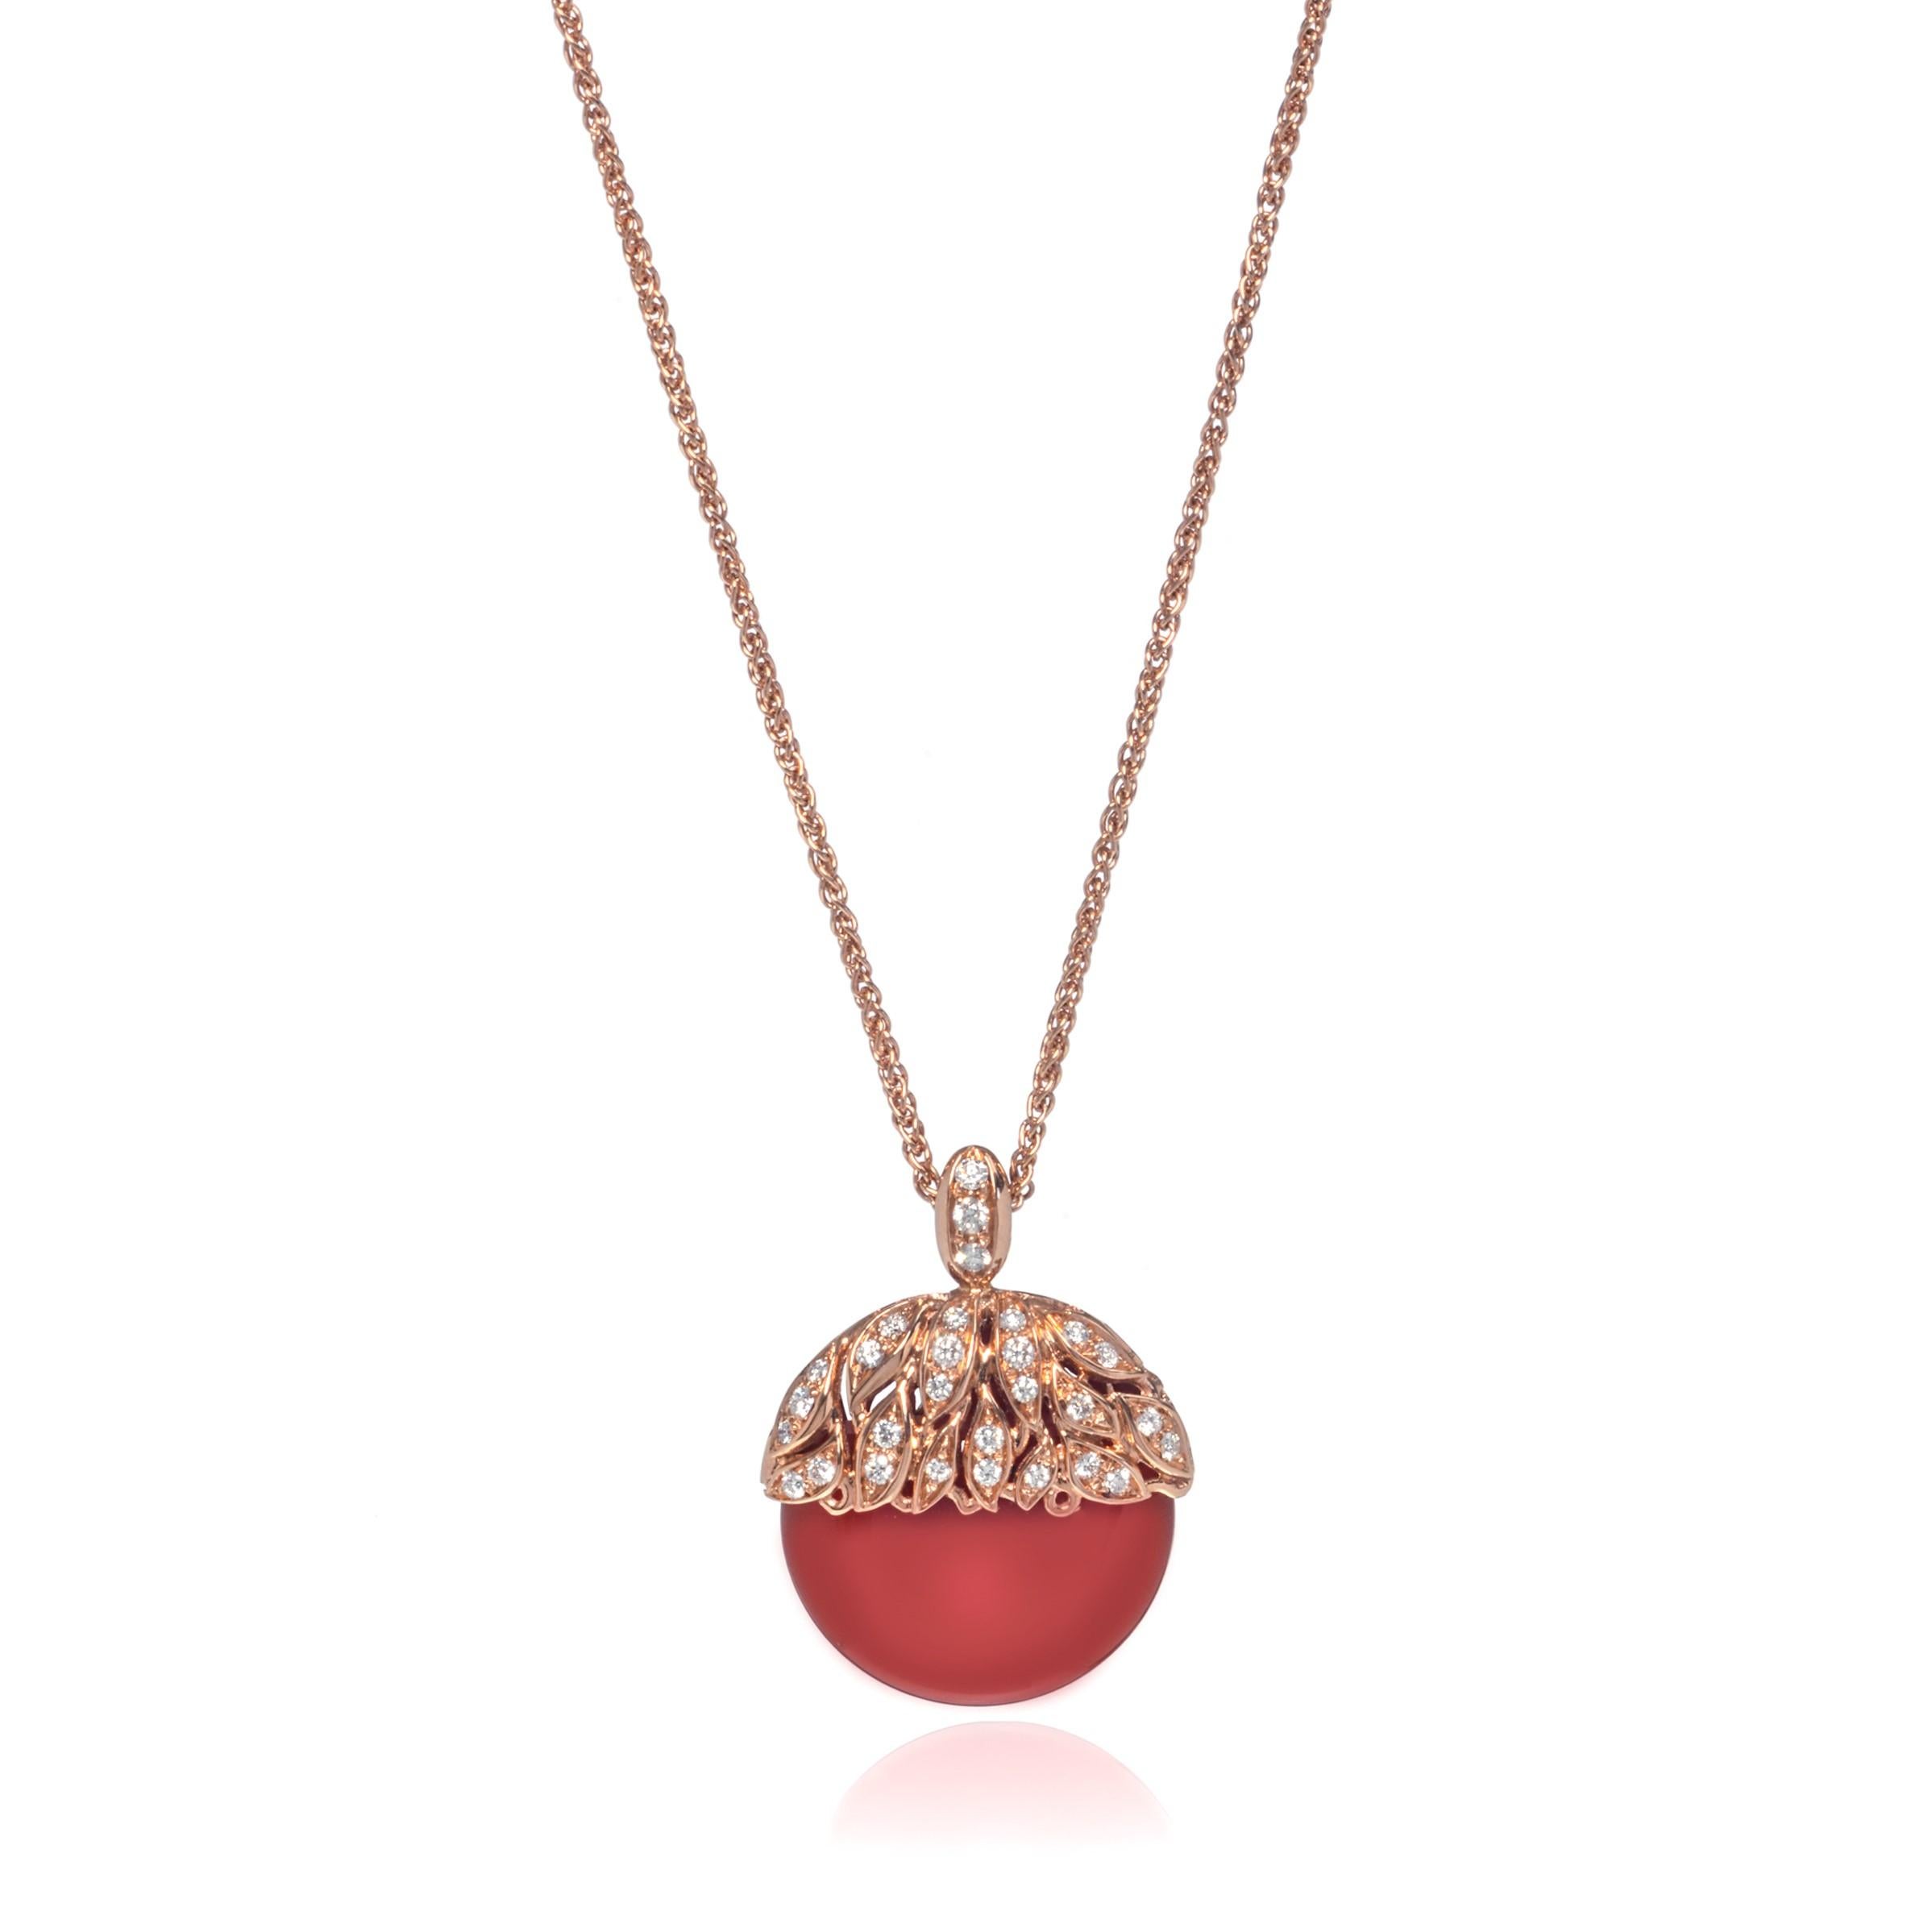 A beautiful Luca Carati gold red Agate and diamond pendant necklace. Crafted in 18k rose gold and set with 0.30cttw brilliant cut diamonds. Diamond color G and VVS clarity. Red Agate size: 2.50 grams. Chain length: 18 inches. pendant size: 1 inch.